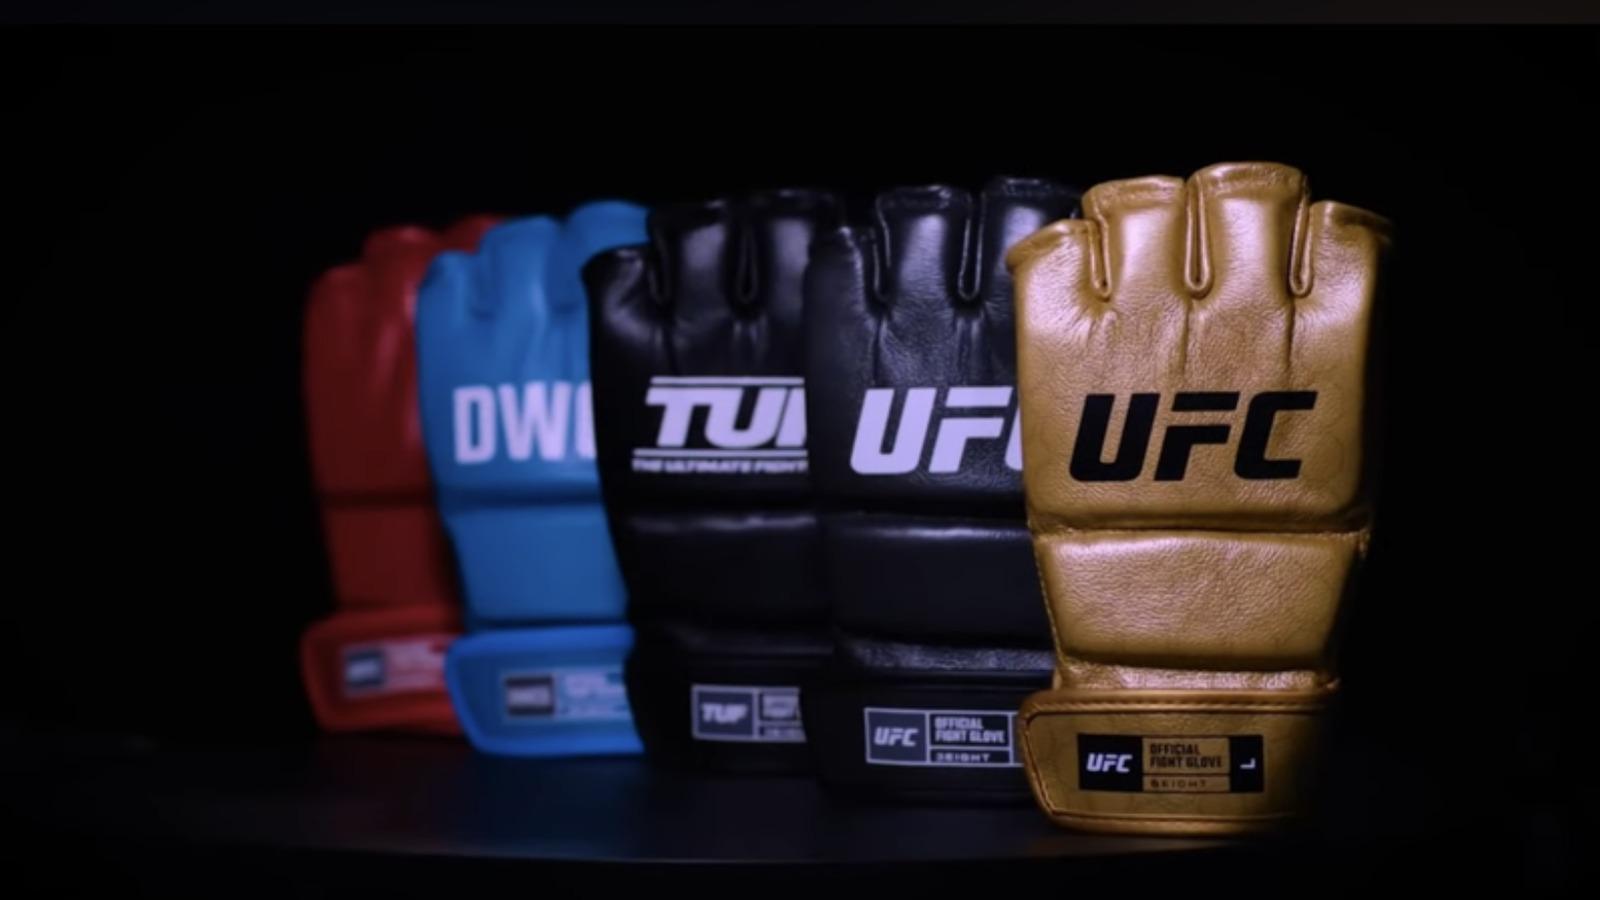 UFC has unveiled a brand new design for new gloves ahead of its historic 300th anniversary card